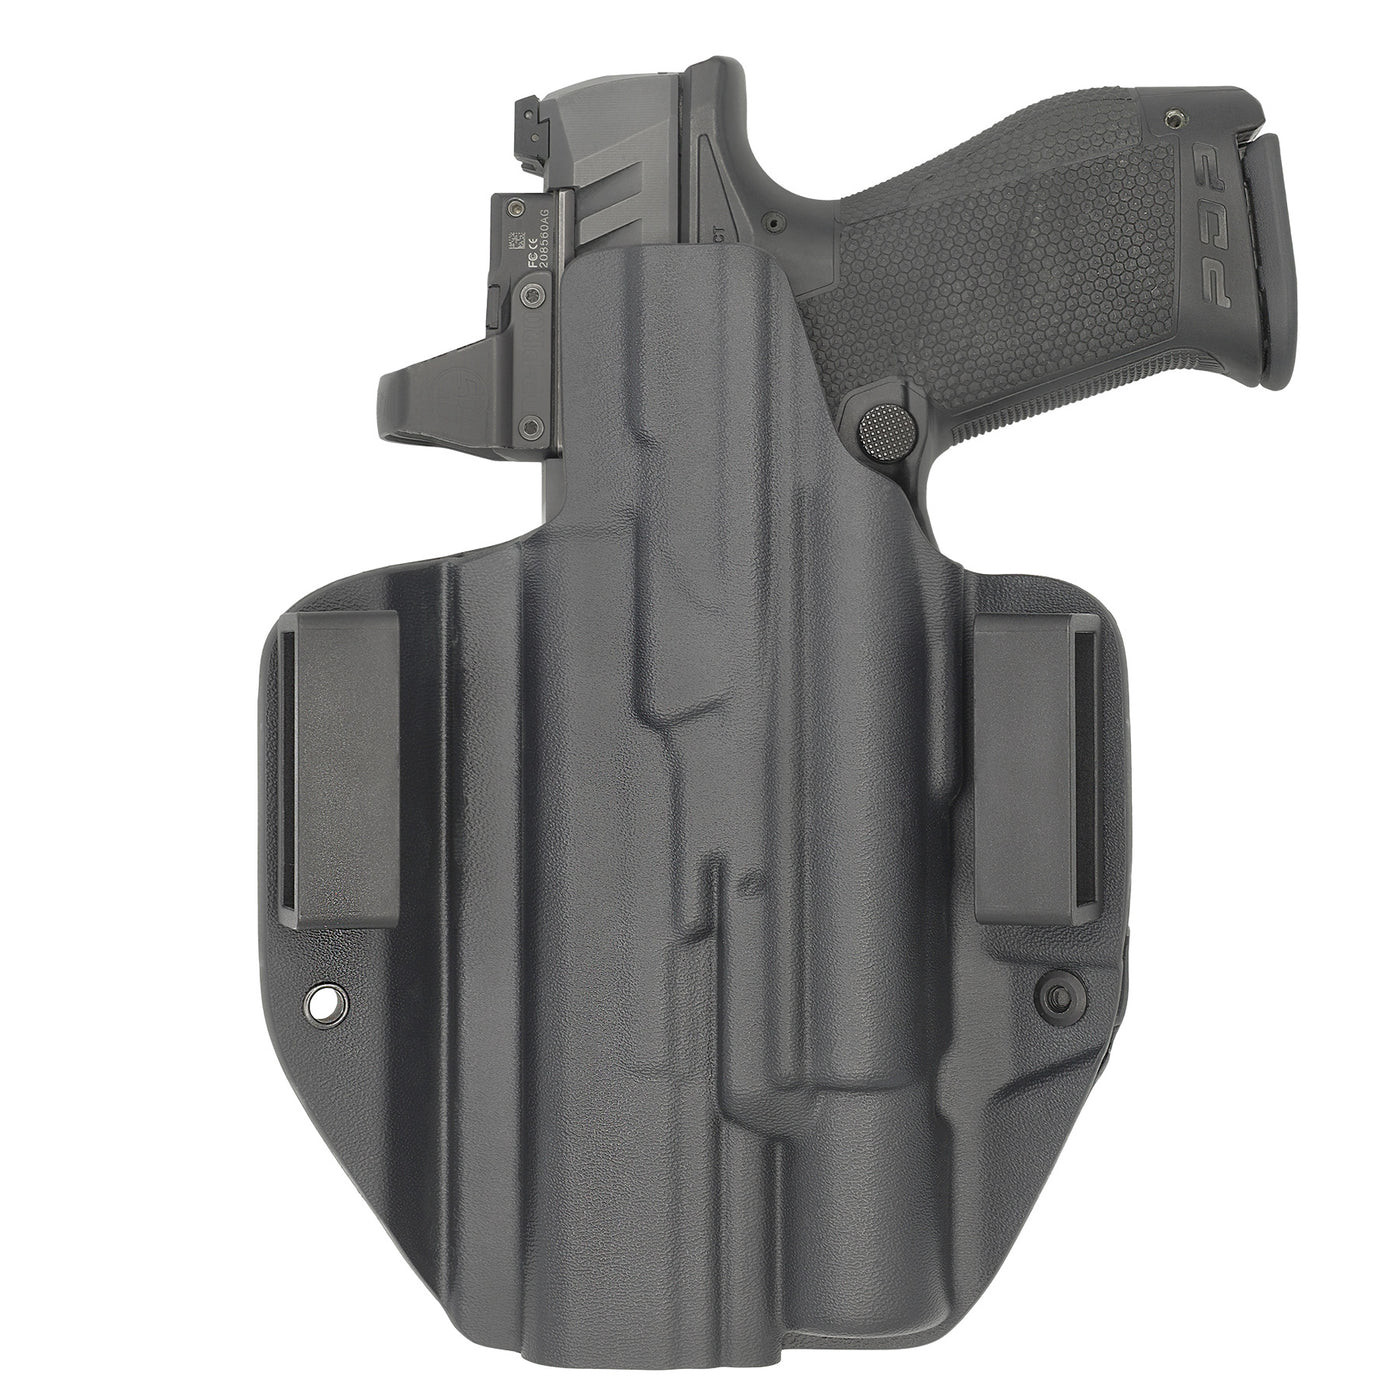 C&G Holsters quickship OWB Tactical CZ P07/09 Surefire X300 in holstered position back view